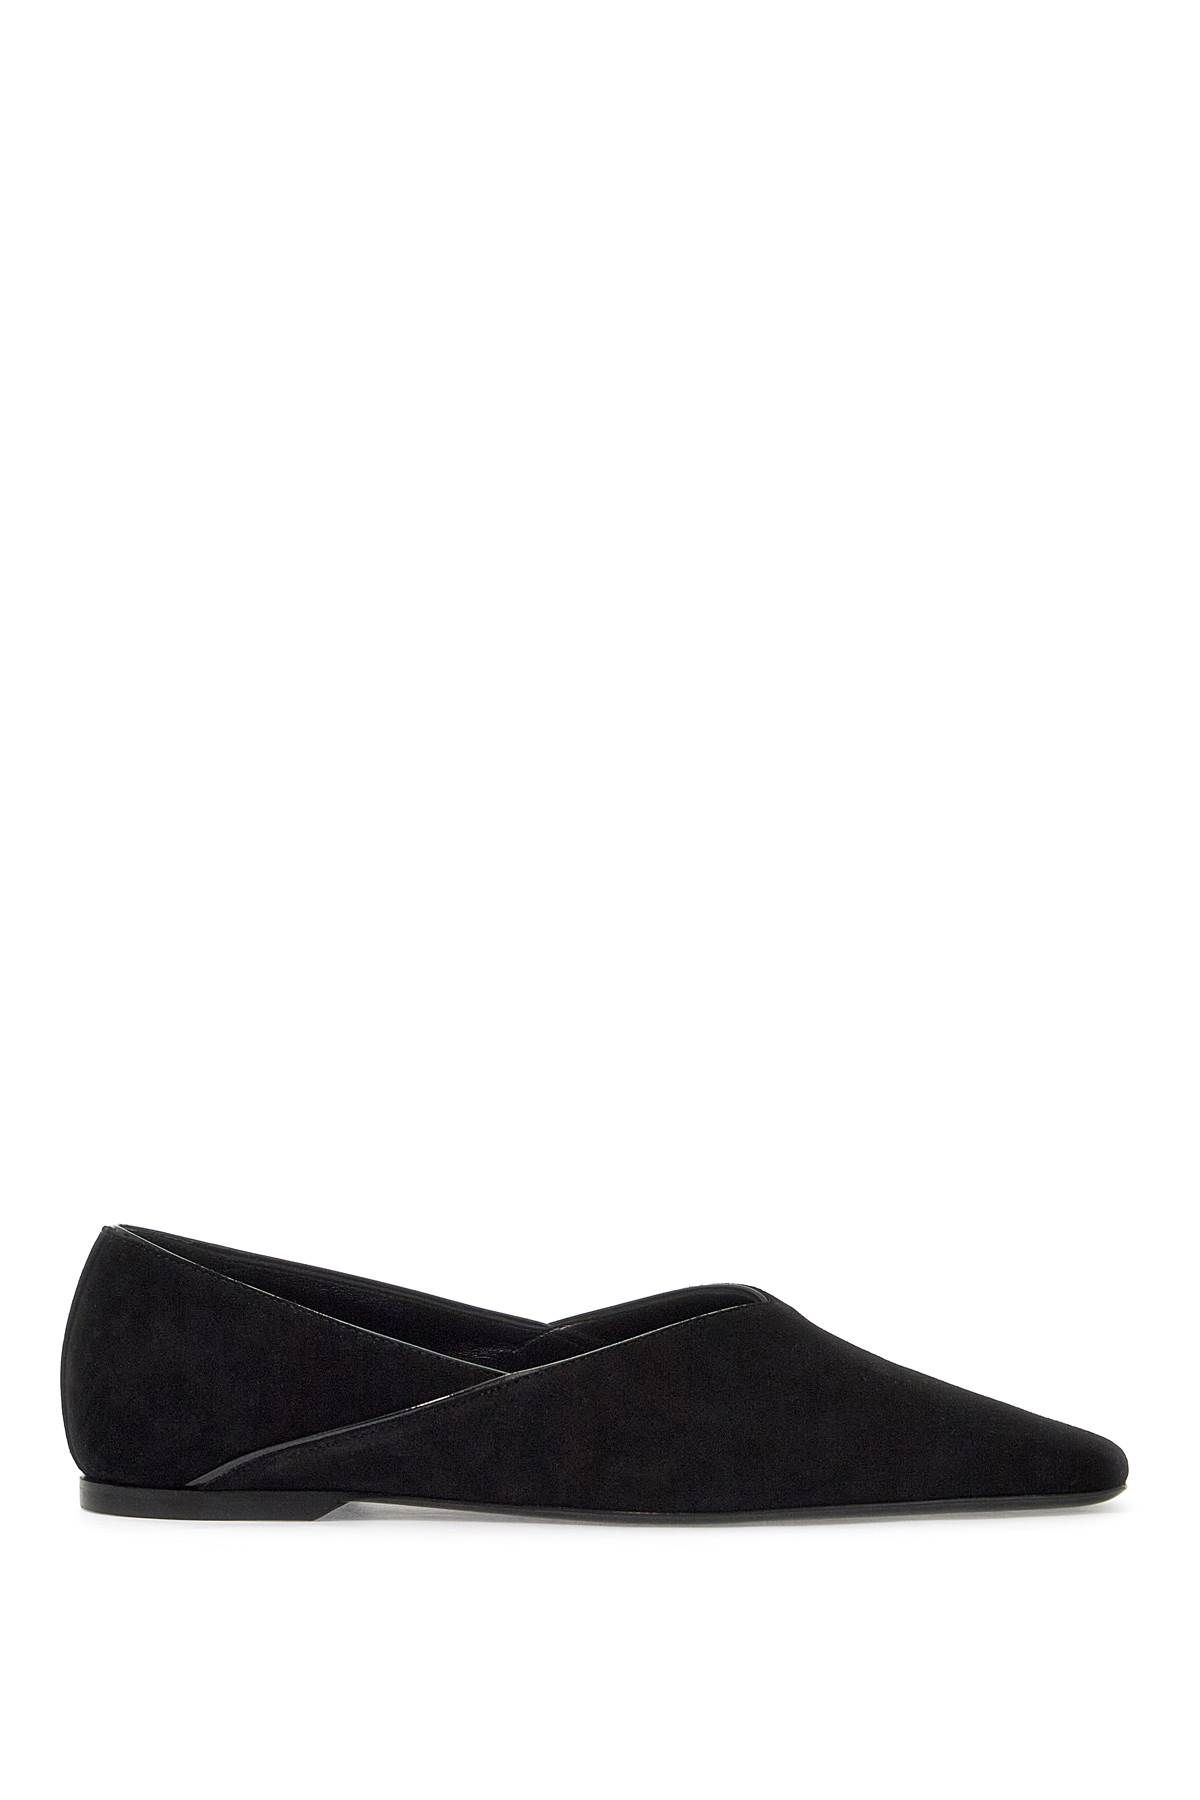 Toteme TOTEME everyday ballet flats for